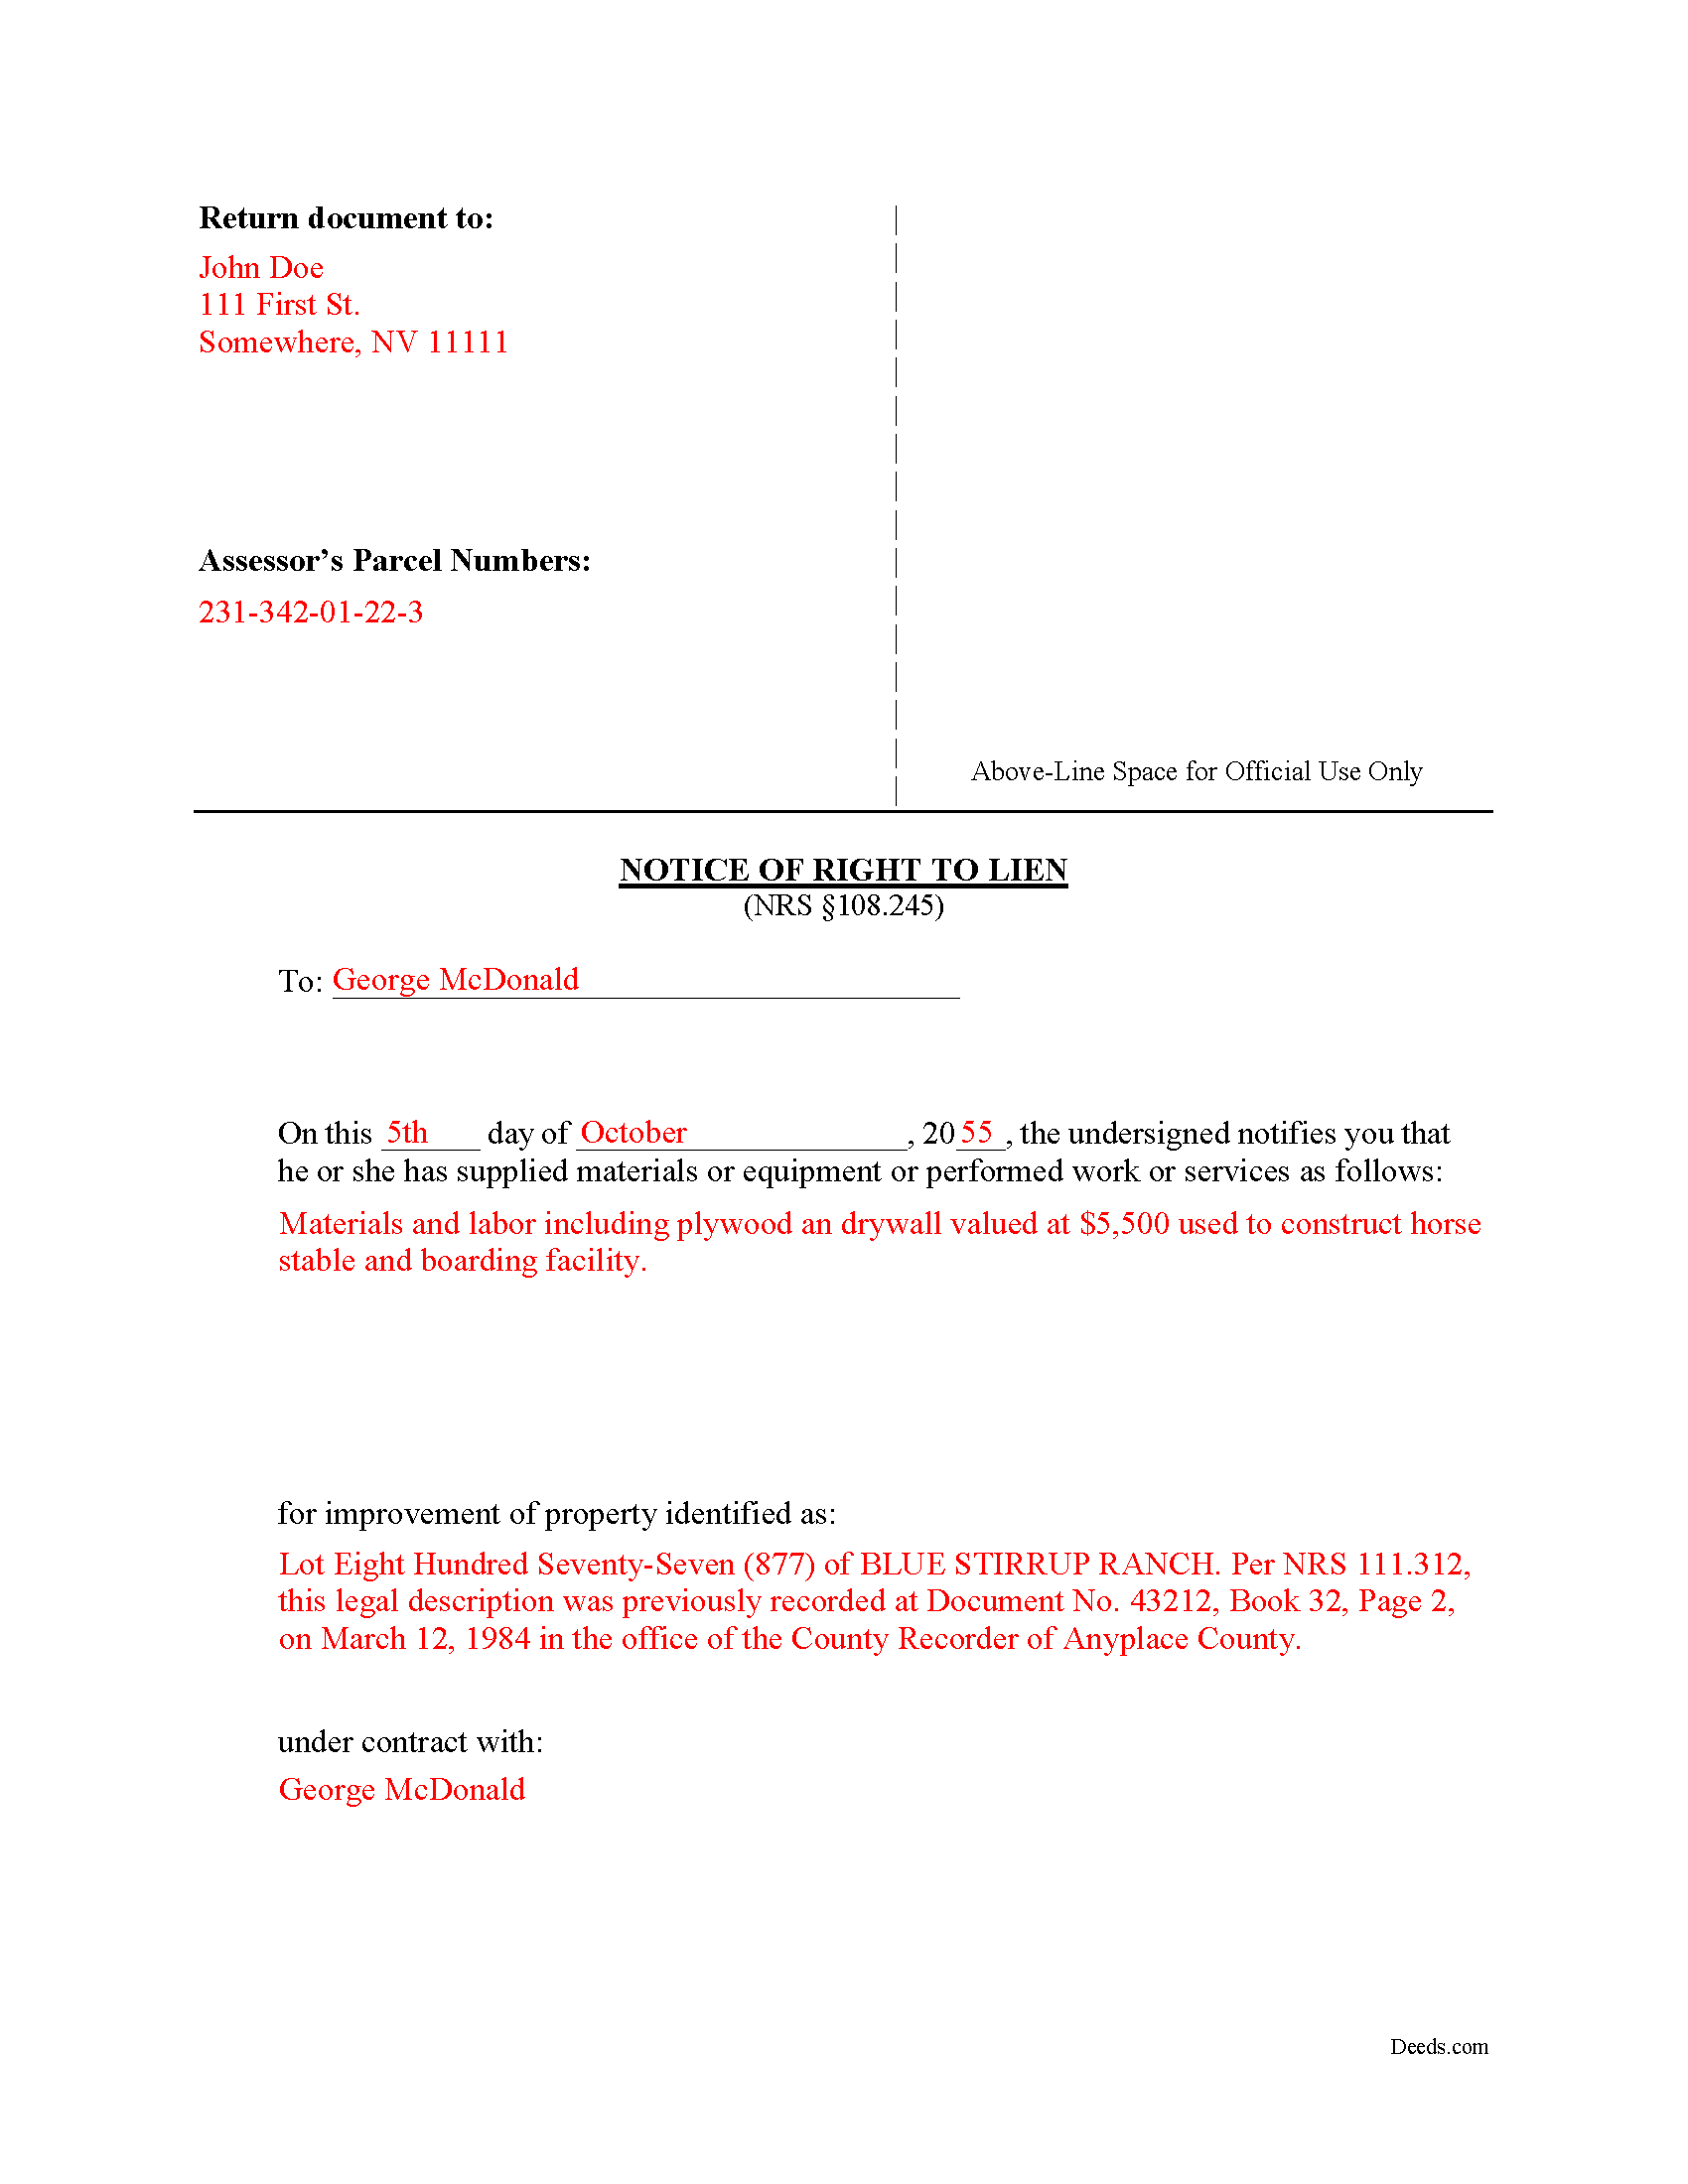 Completed Example of the Notice of Right to Lien Document